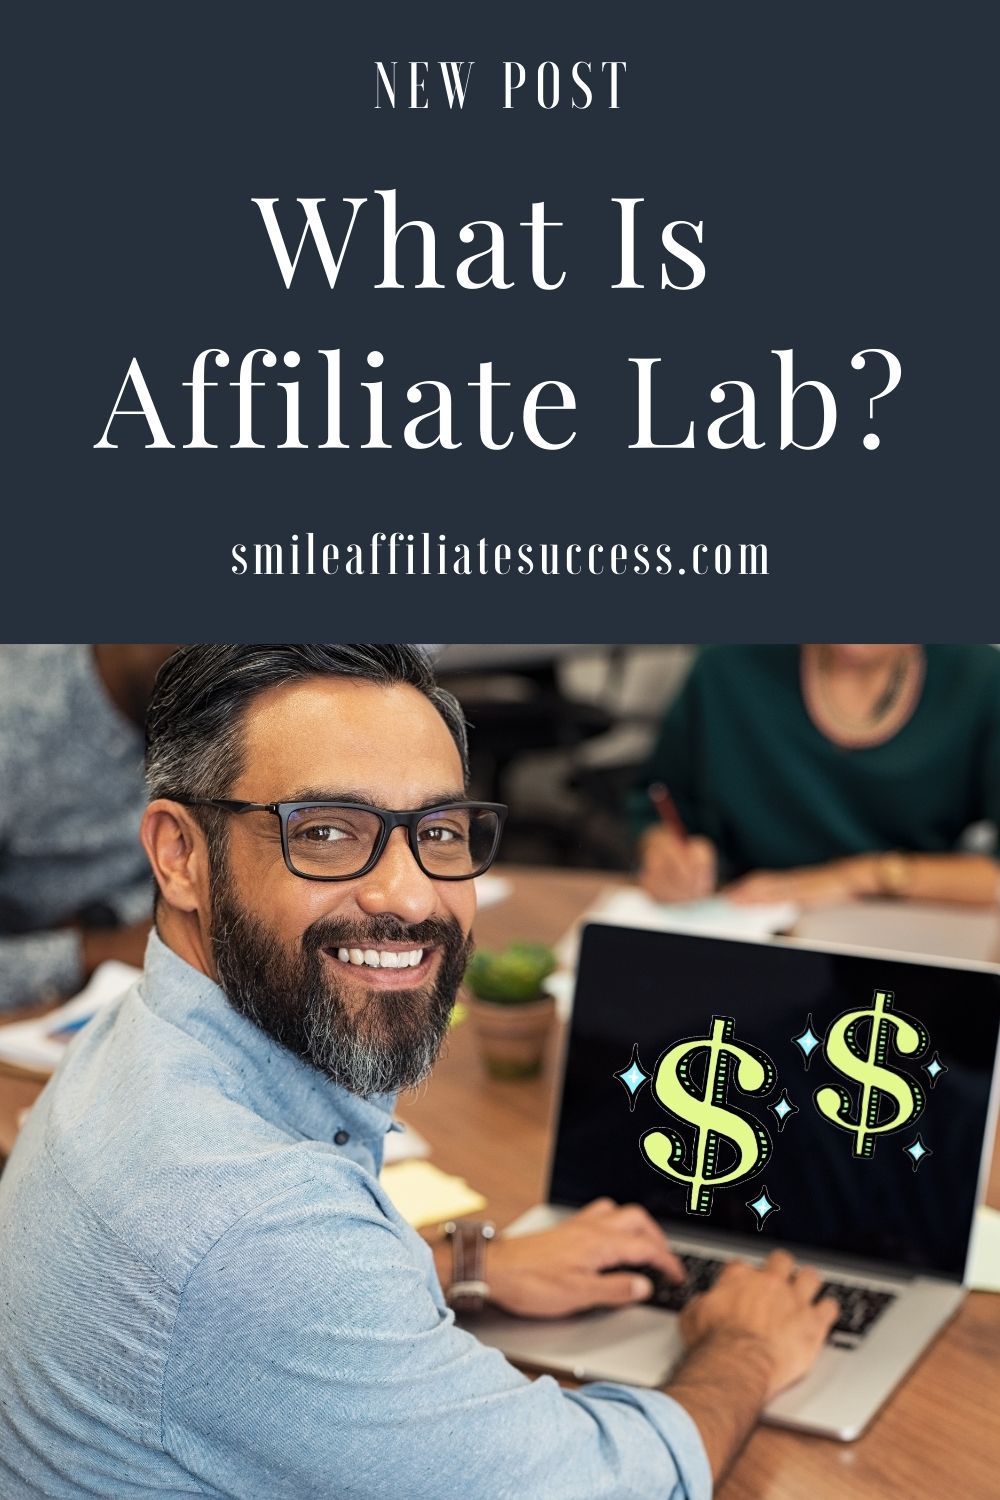 What Is Affiliate Lab?